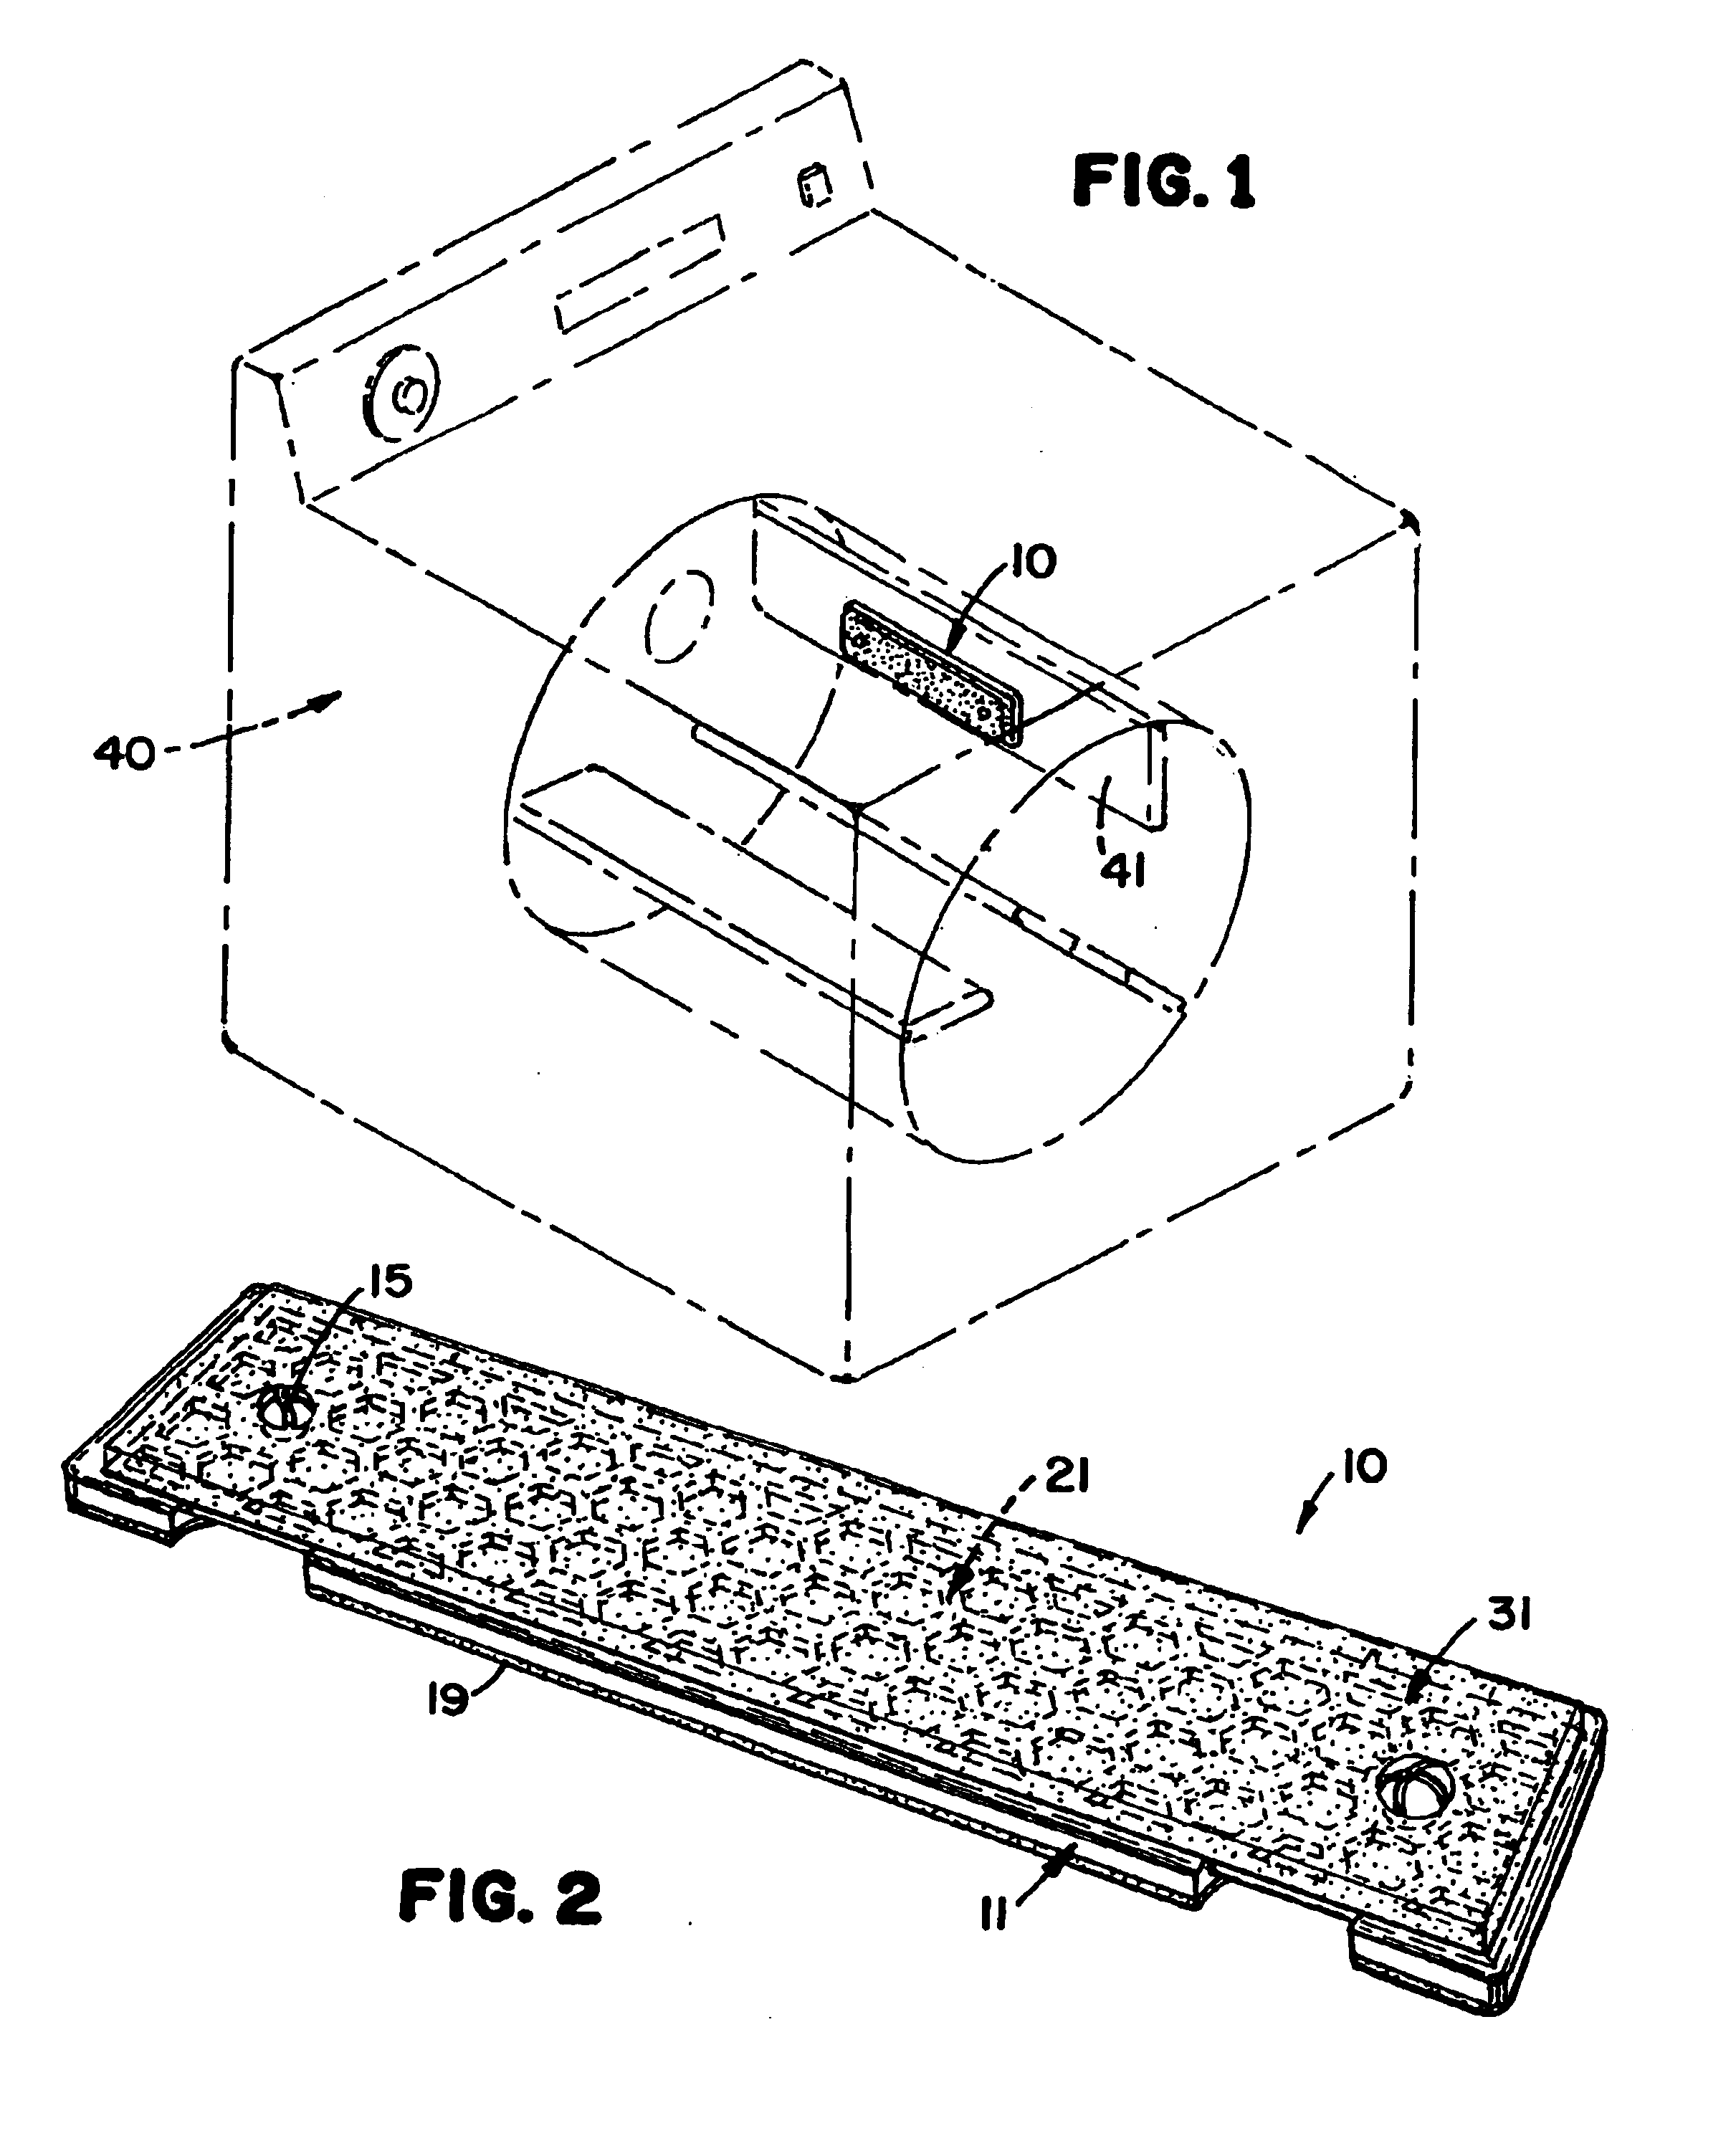 Product dispenser and carrier